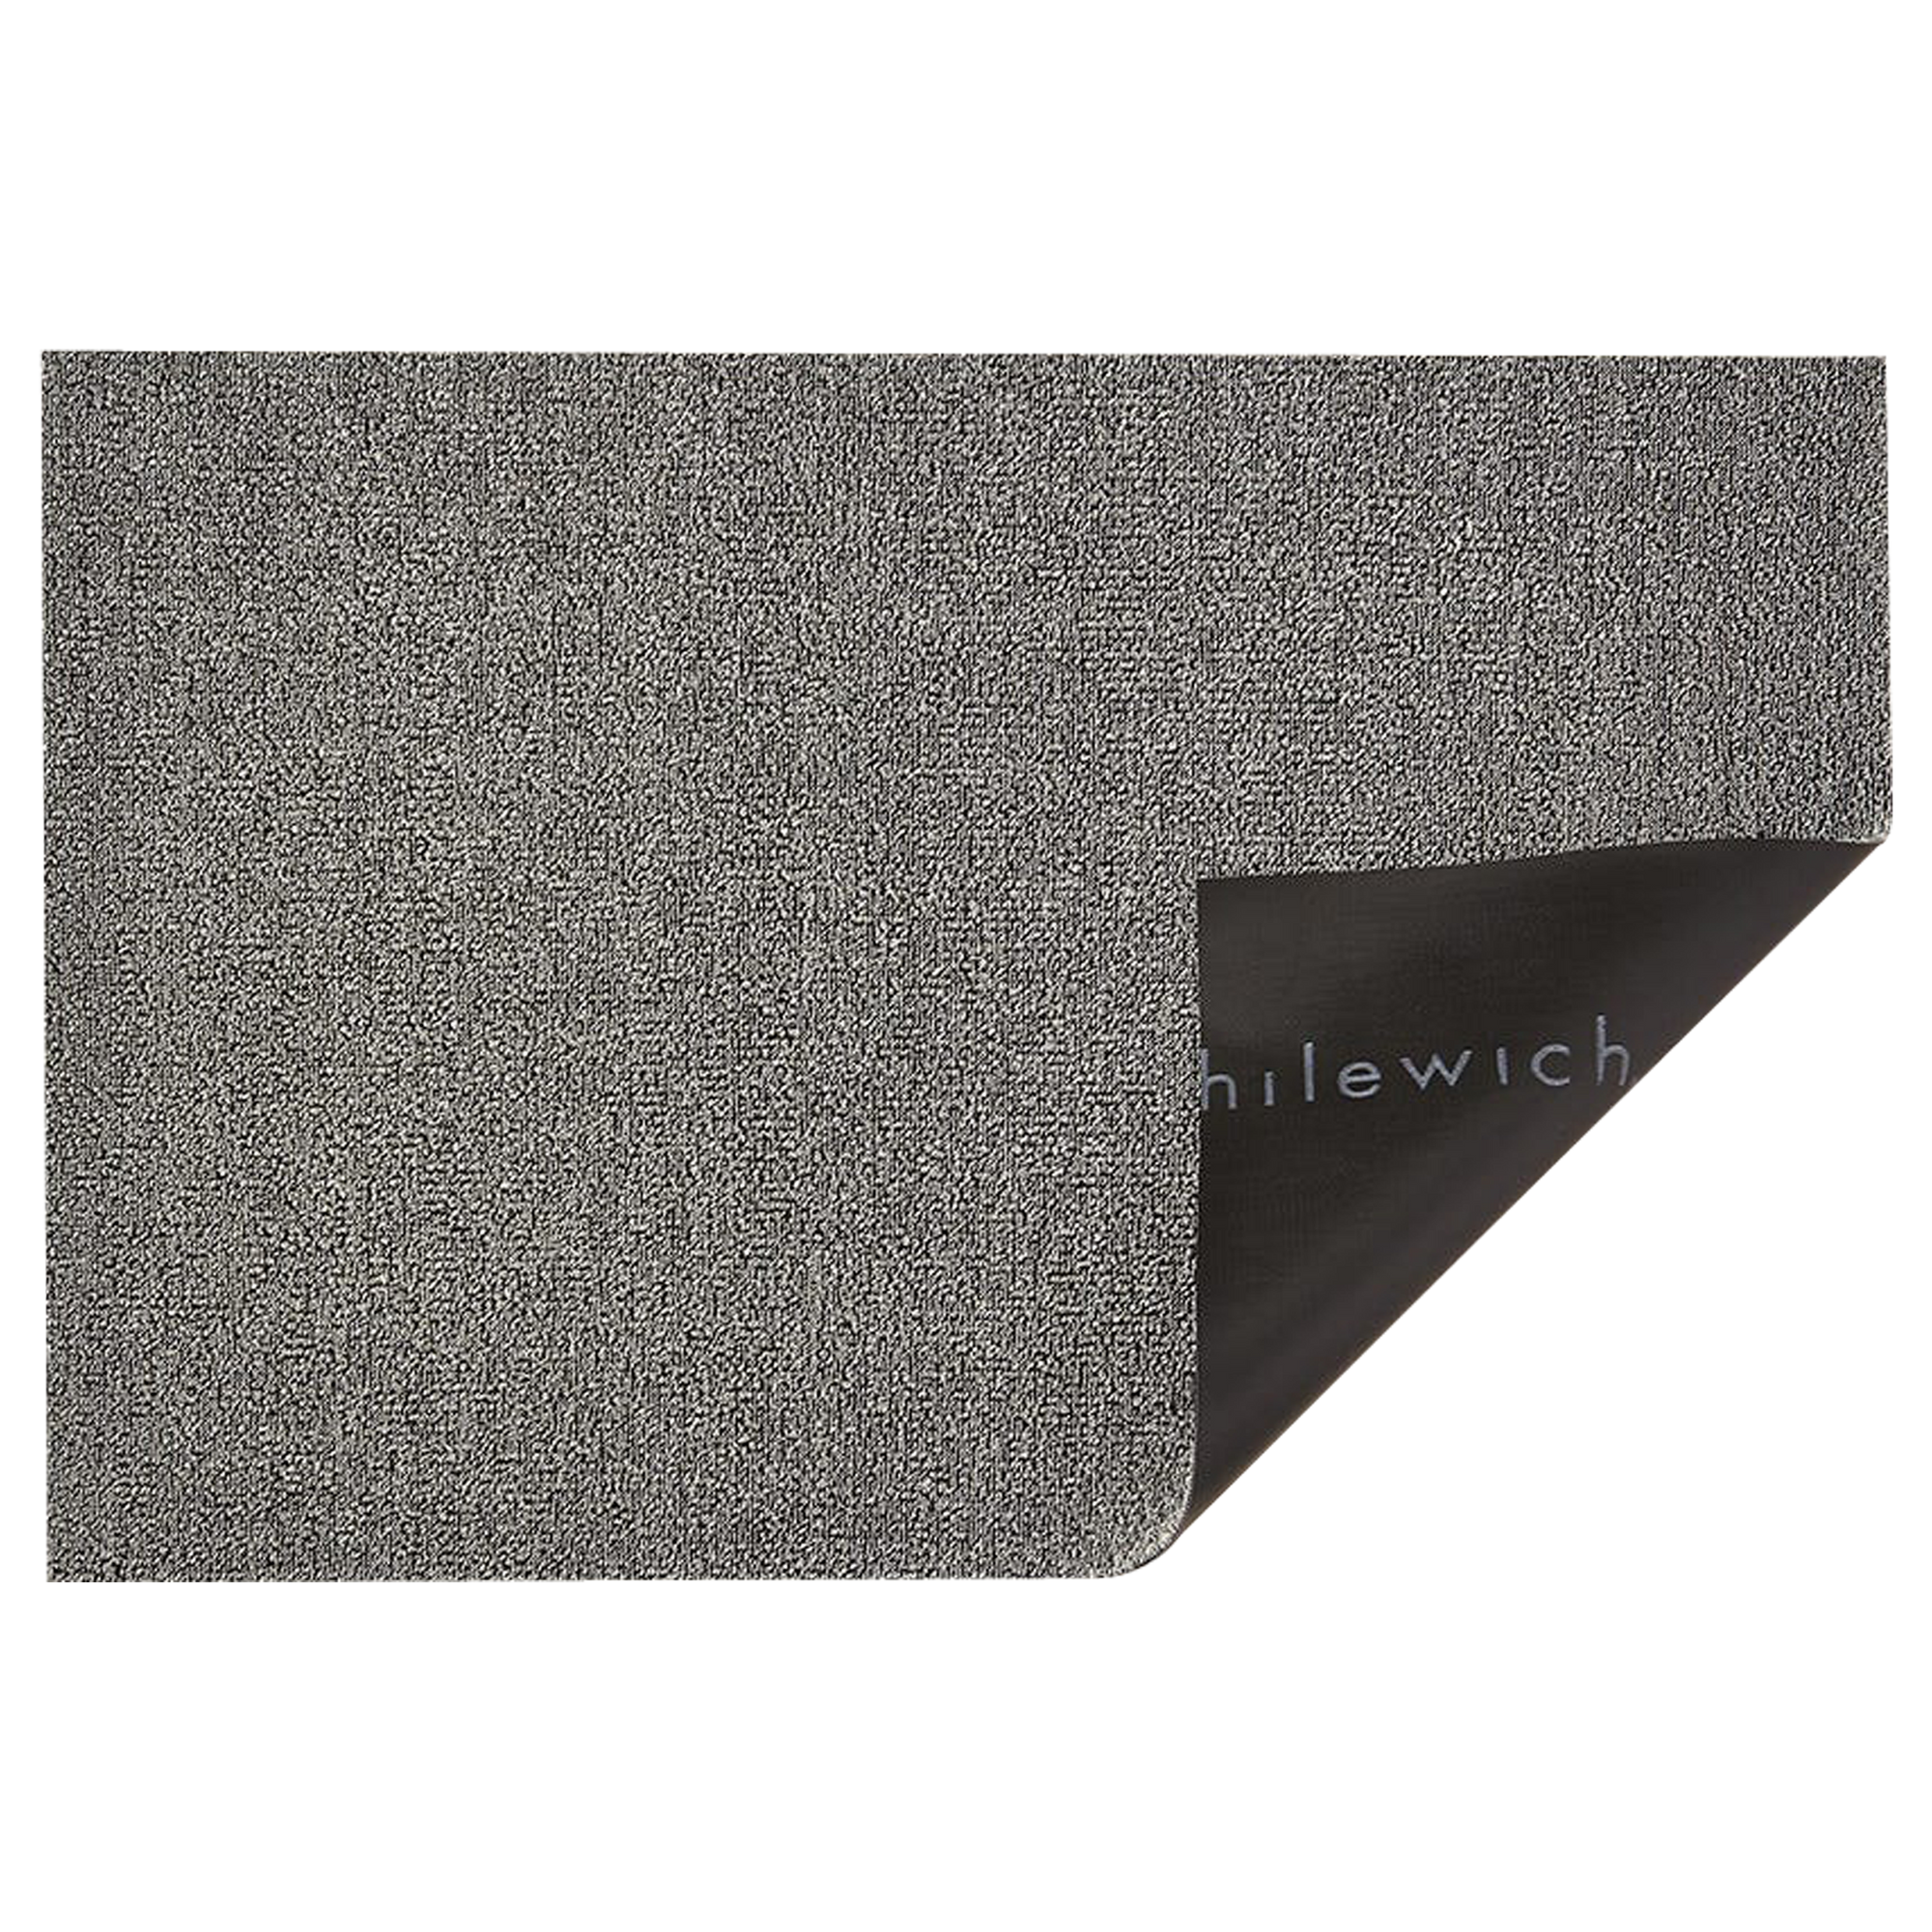 A versatile indoor/outdoor design, this heathered shag mat will fit seamlessly into a wide variety of décor styles and is ideal for bathrooms, entryways, kitchens, and outdoor spa